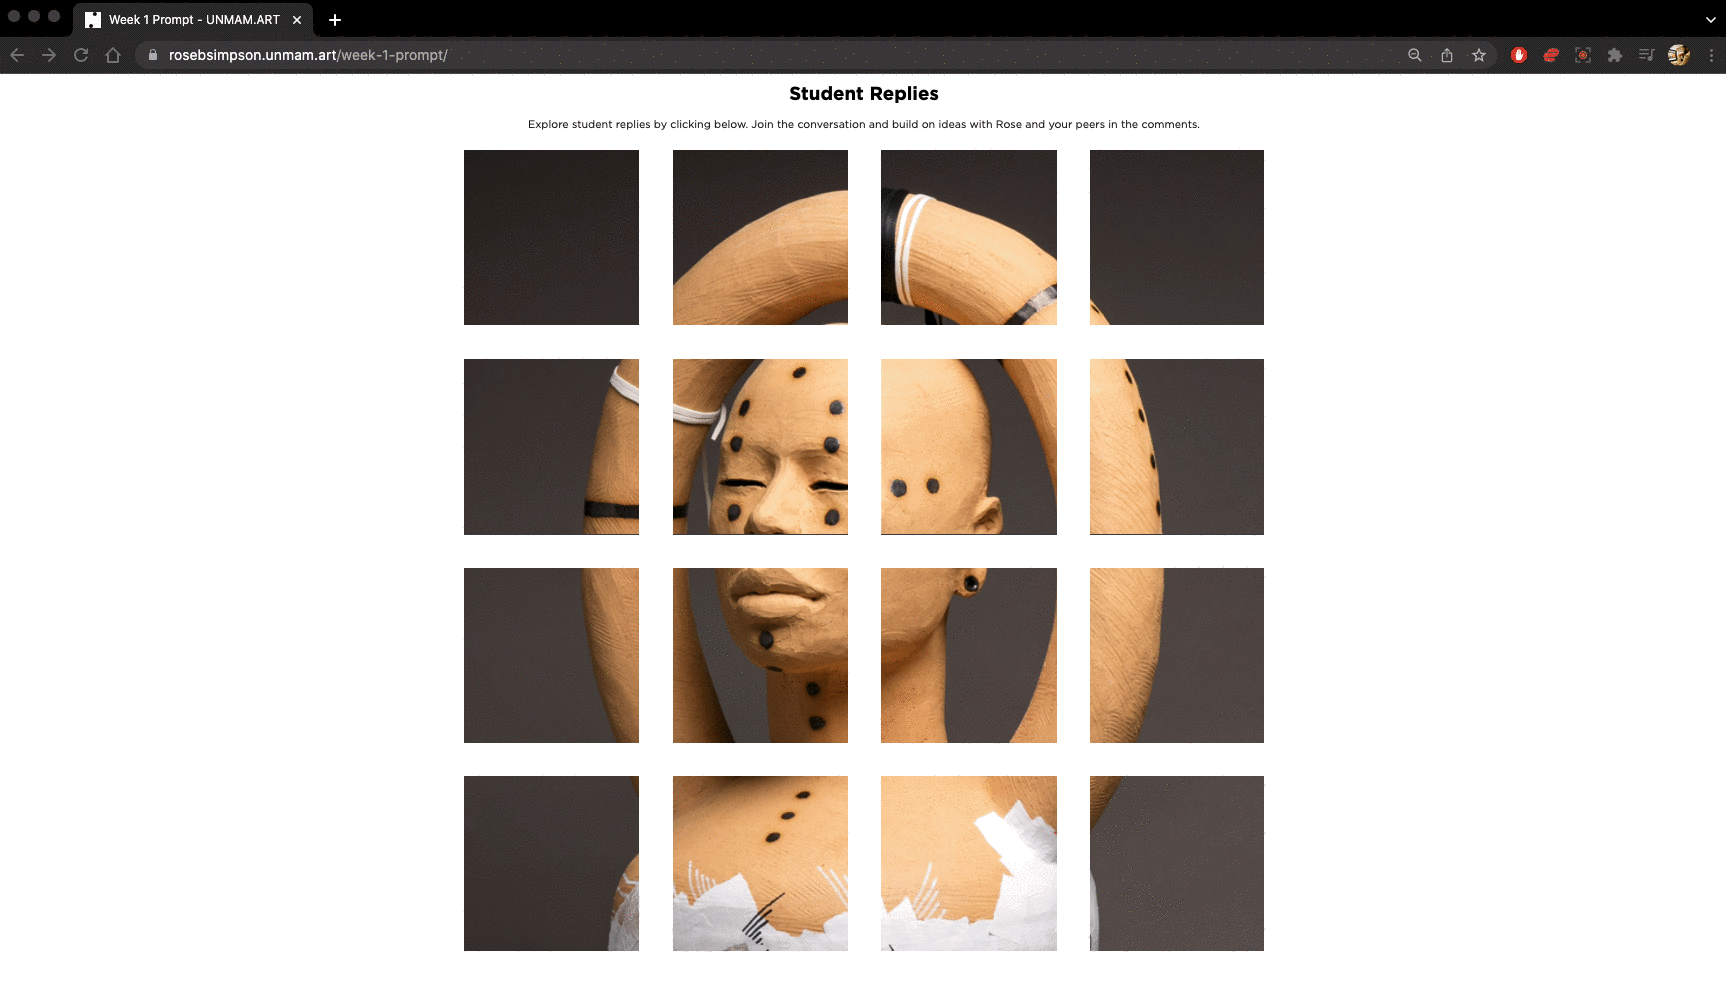 An animated .gif showing the navigation of student replies on UNMAM.ART